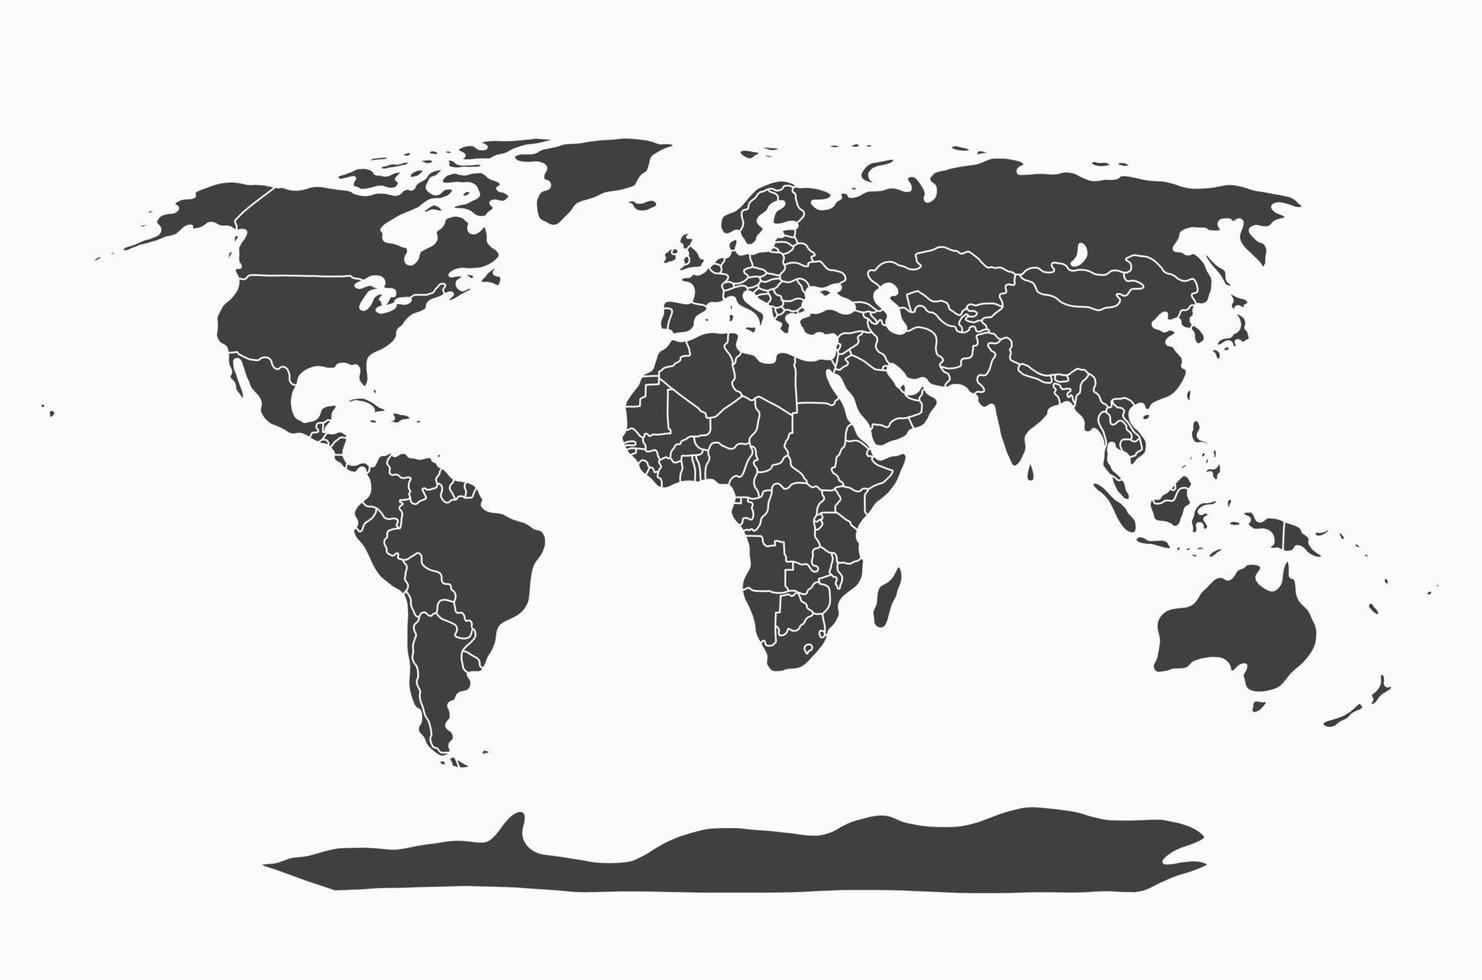 doodle freehand drawing of world map. vector